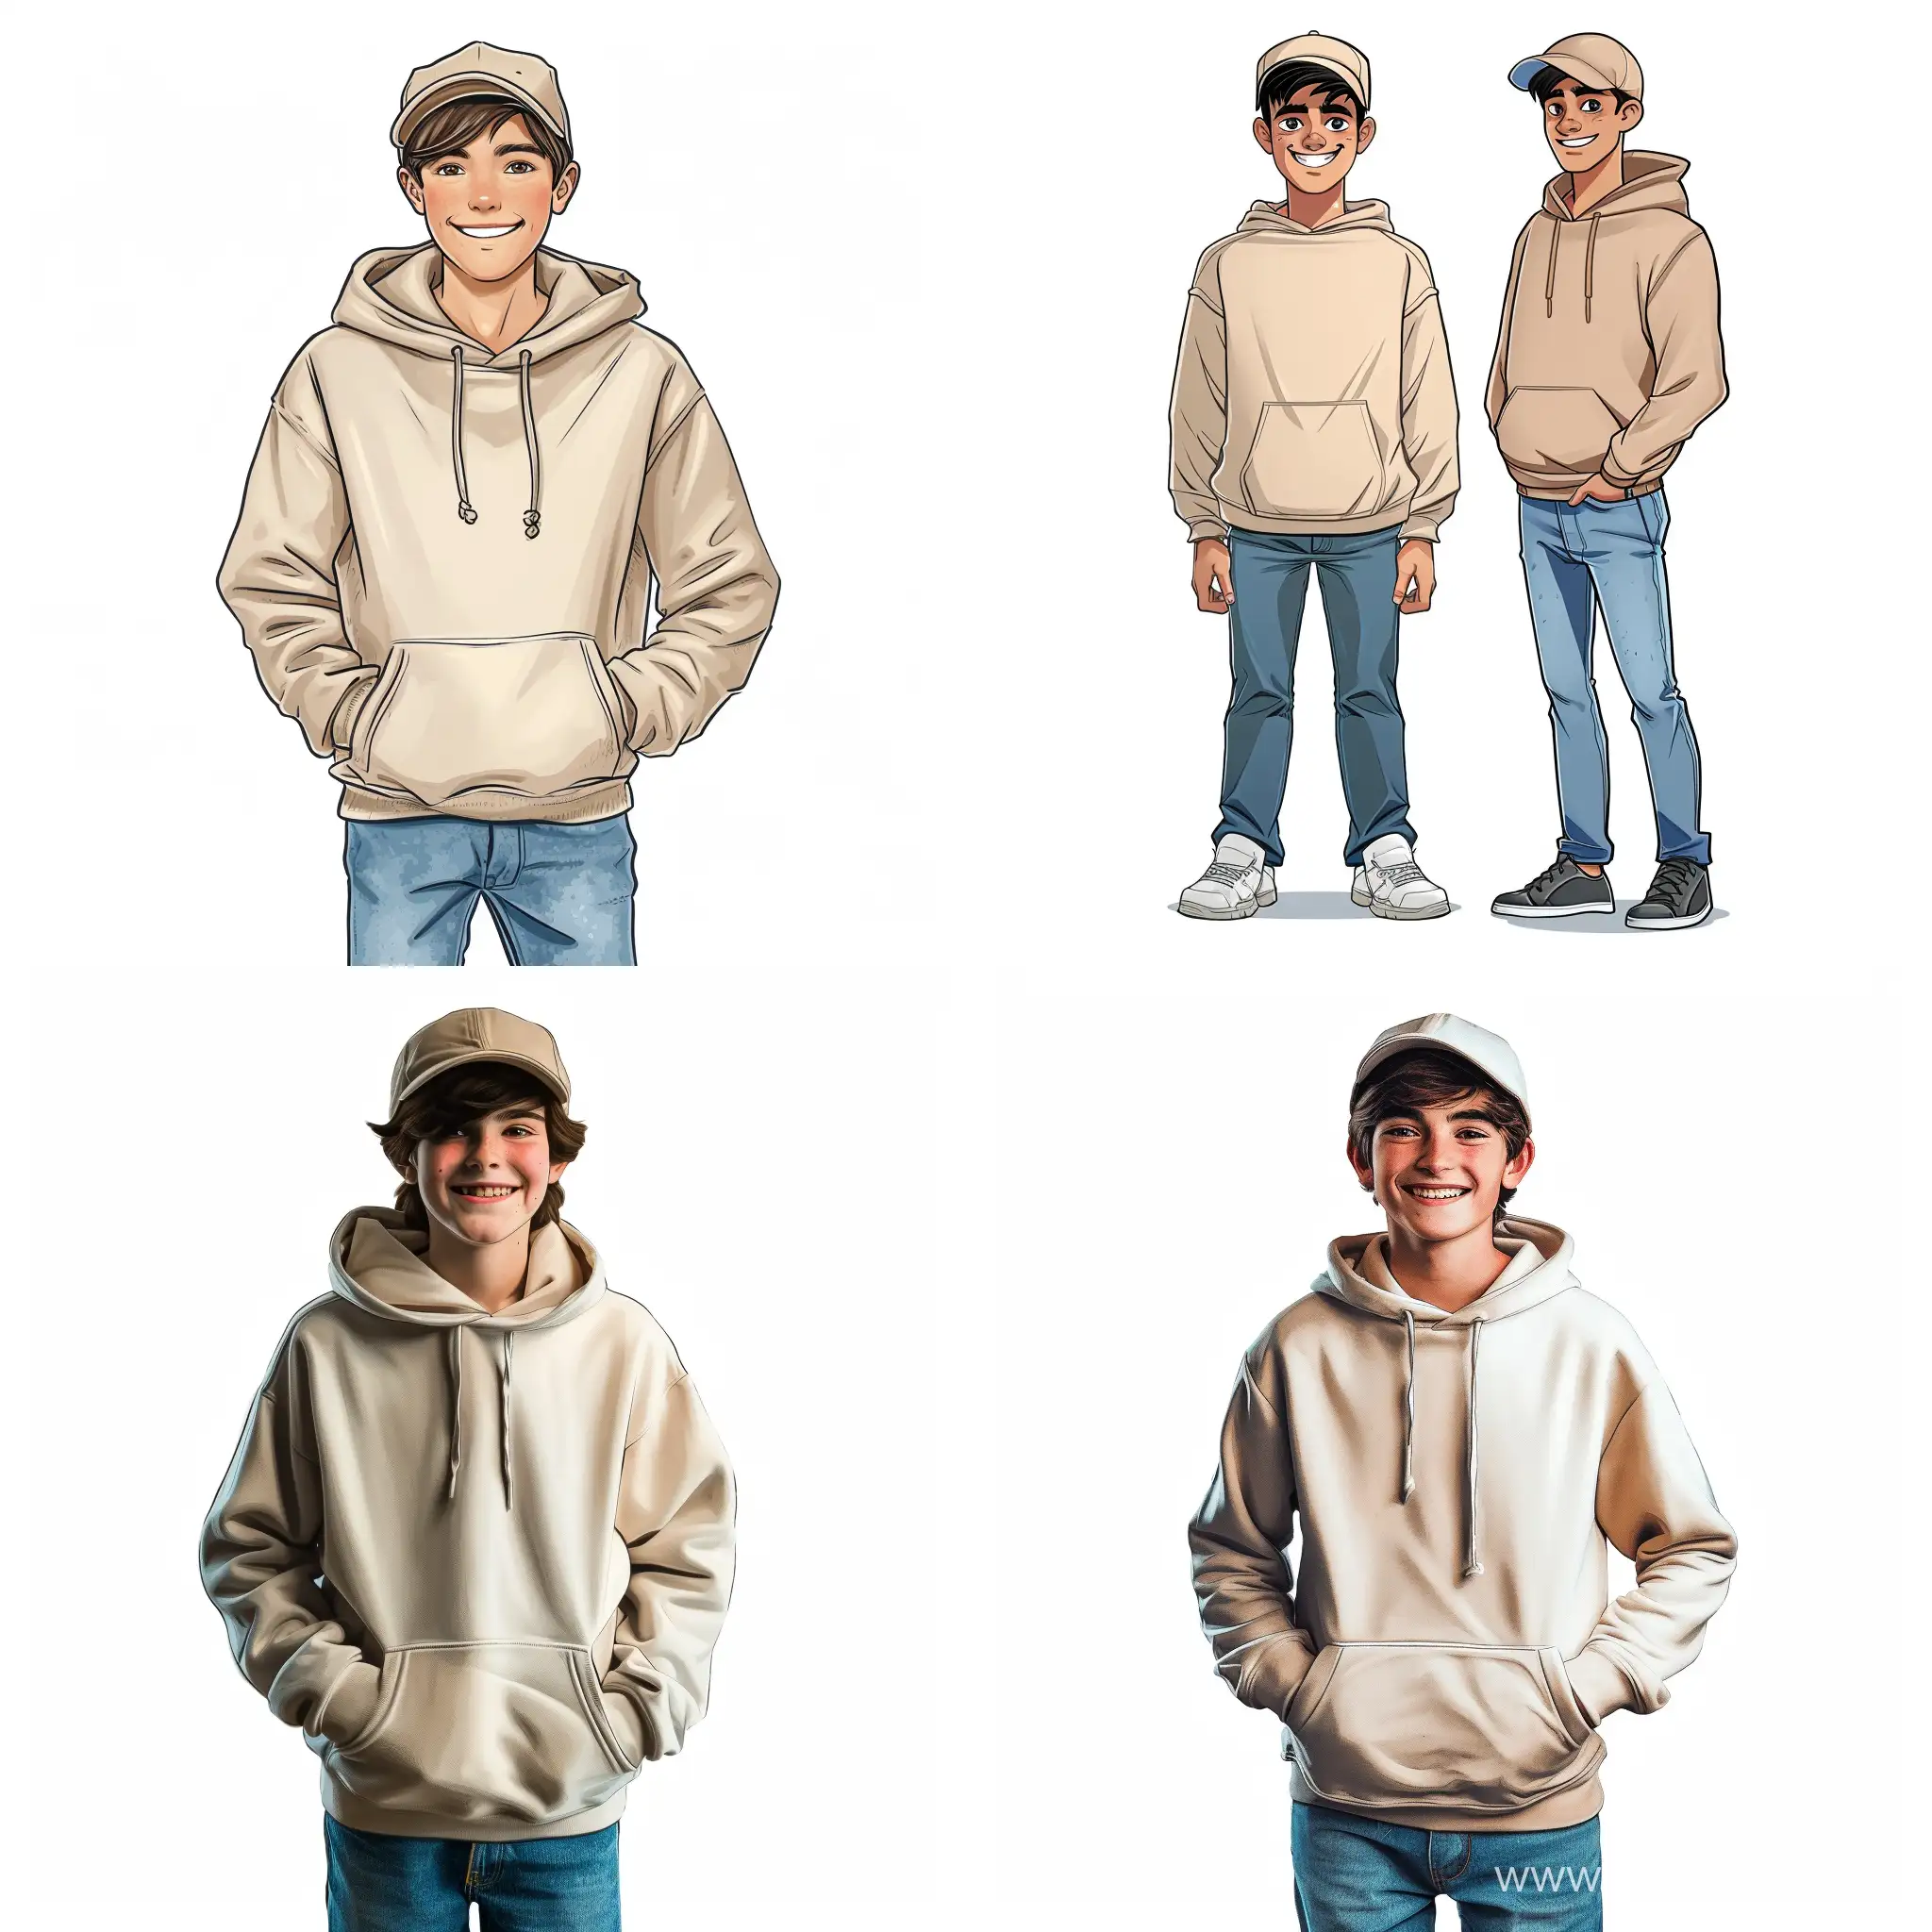 Cheerful-14YearOld-Guy-in-Casual-Attire-on-White-Background